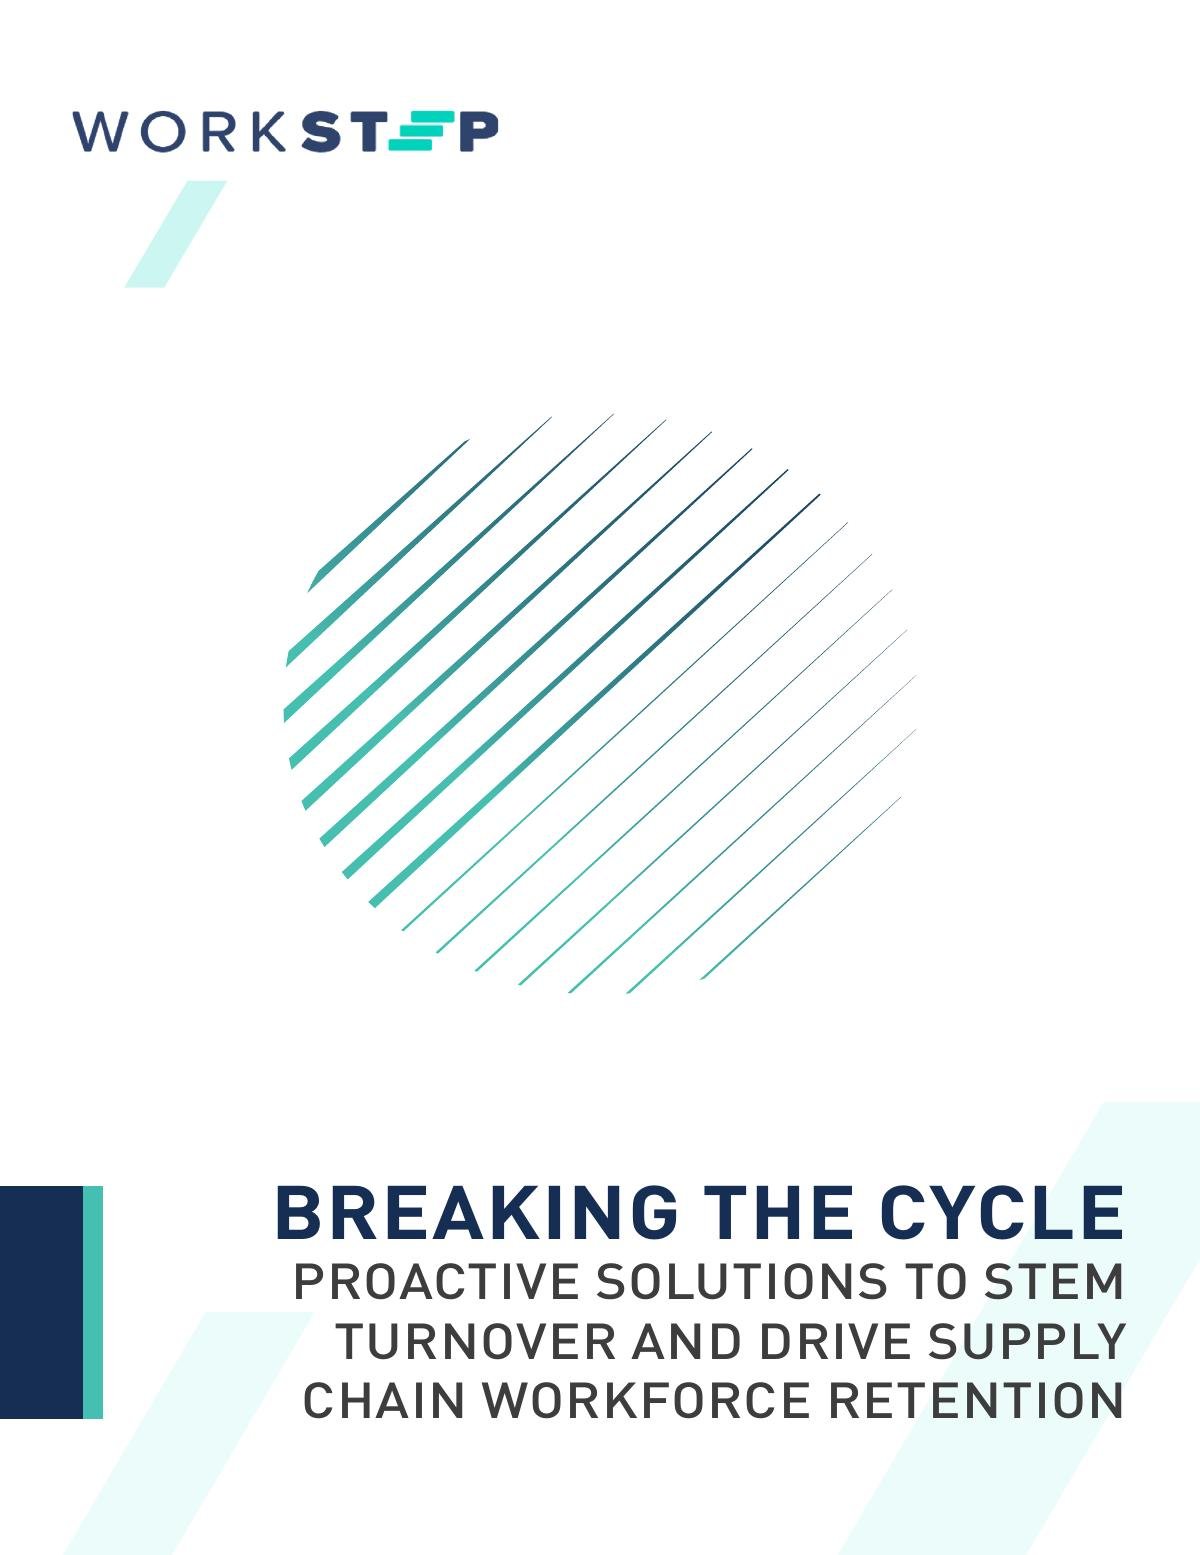 WorkStep eBook: Proactive Solutions to Stem Turnover And Drive Supply Chain Workforce Retention